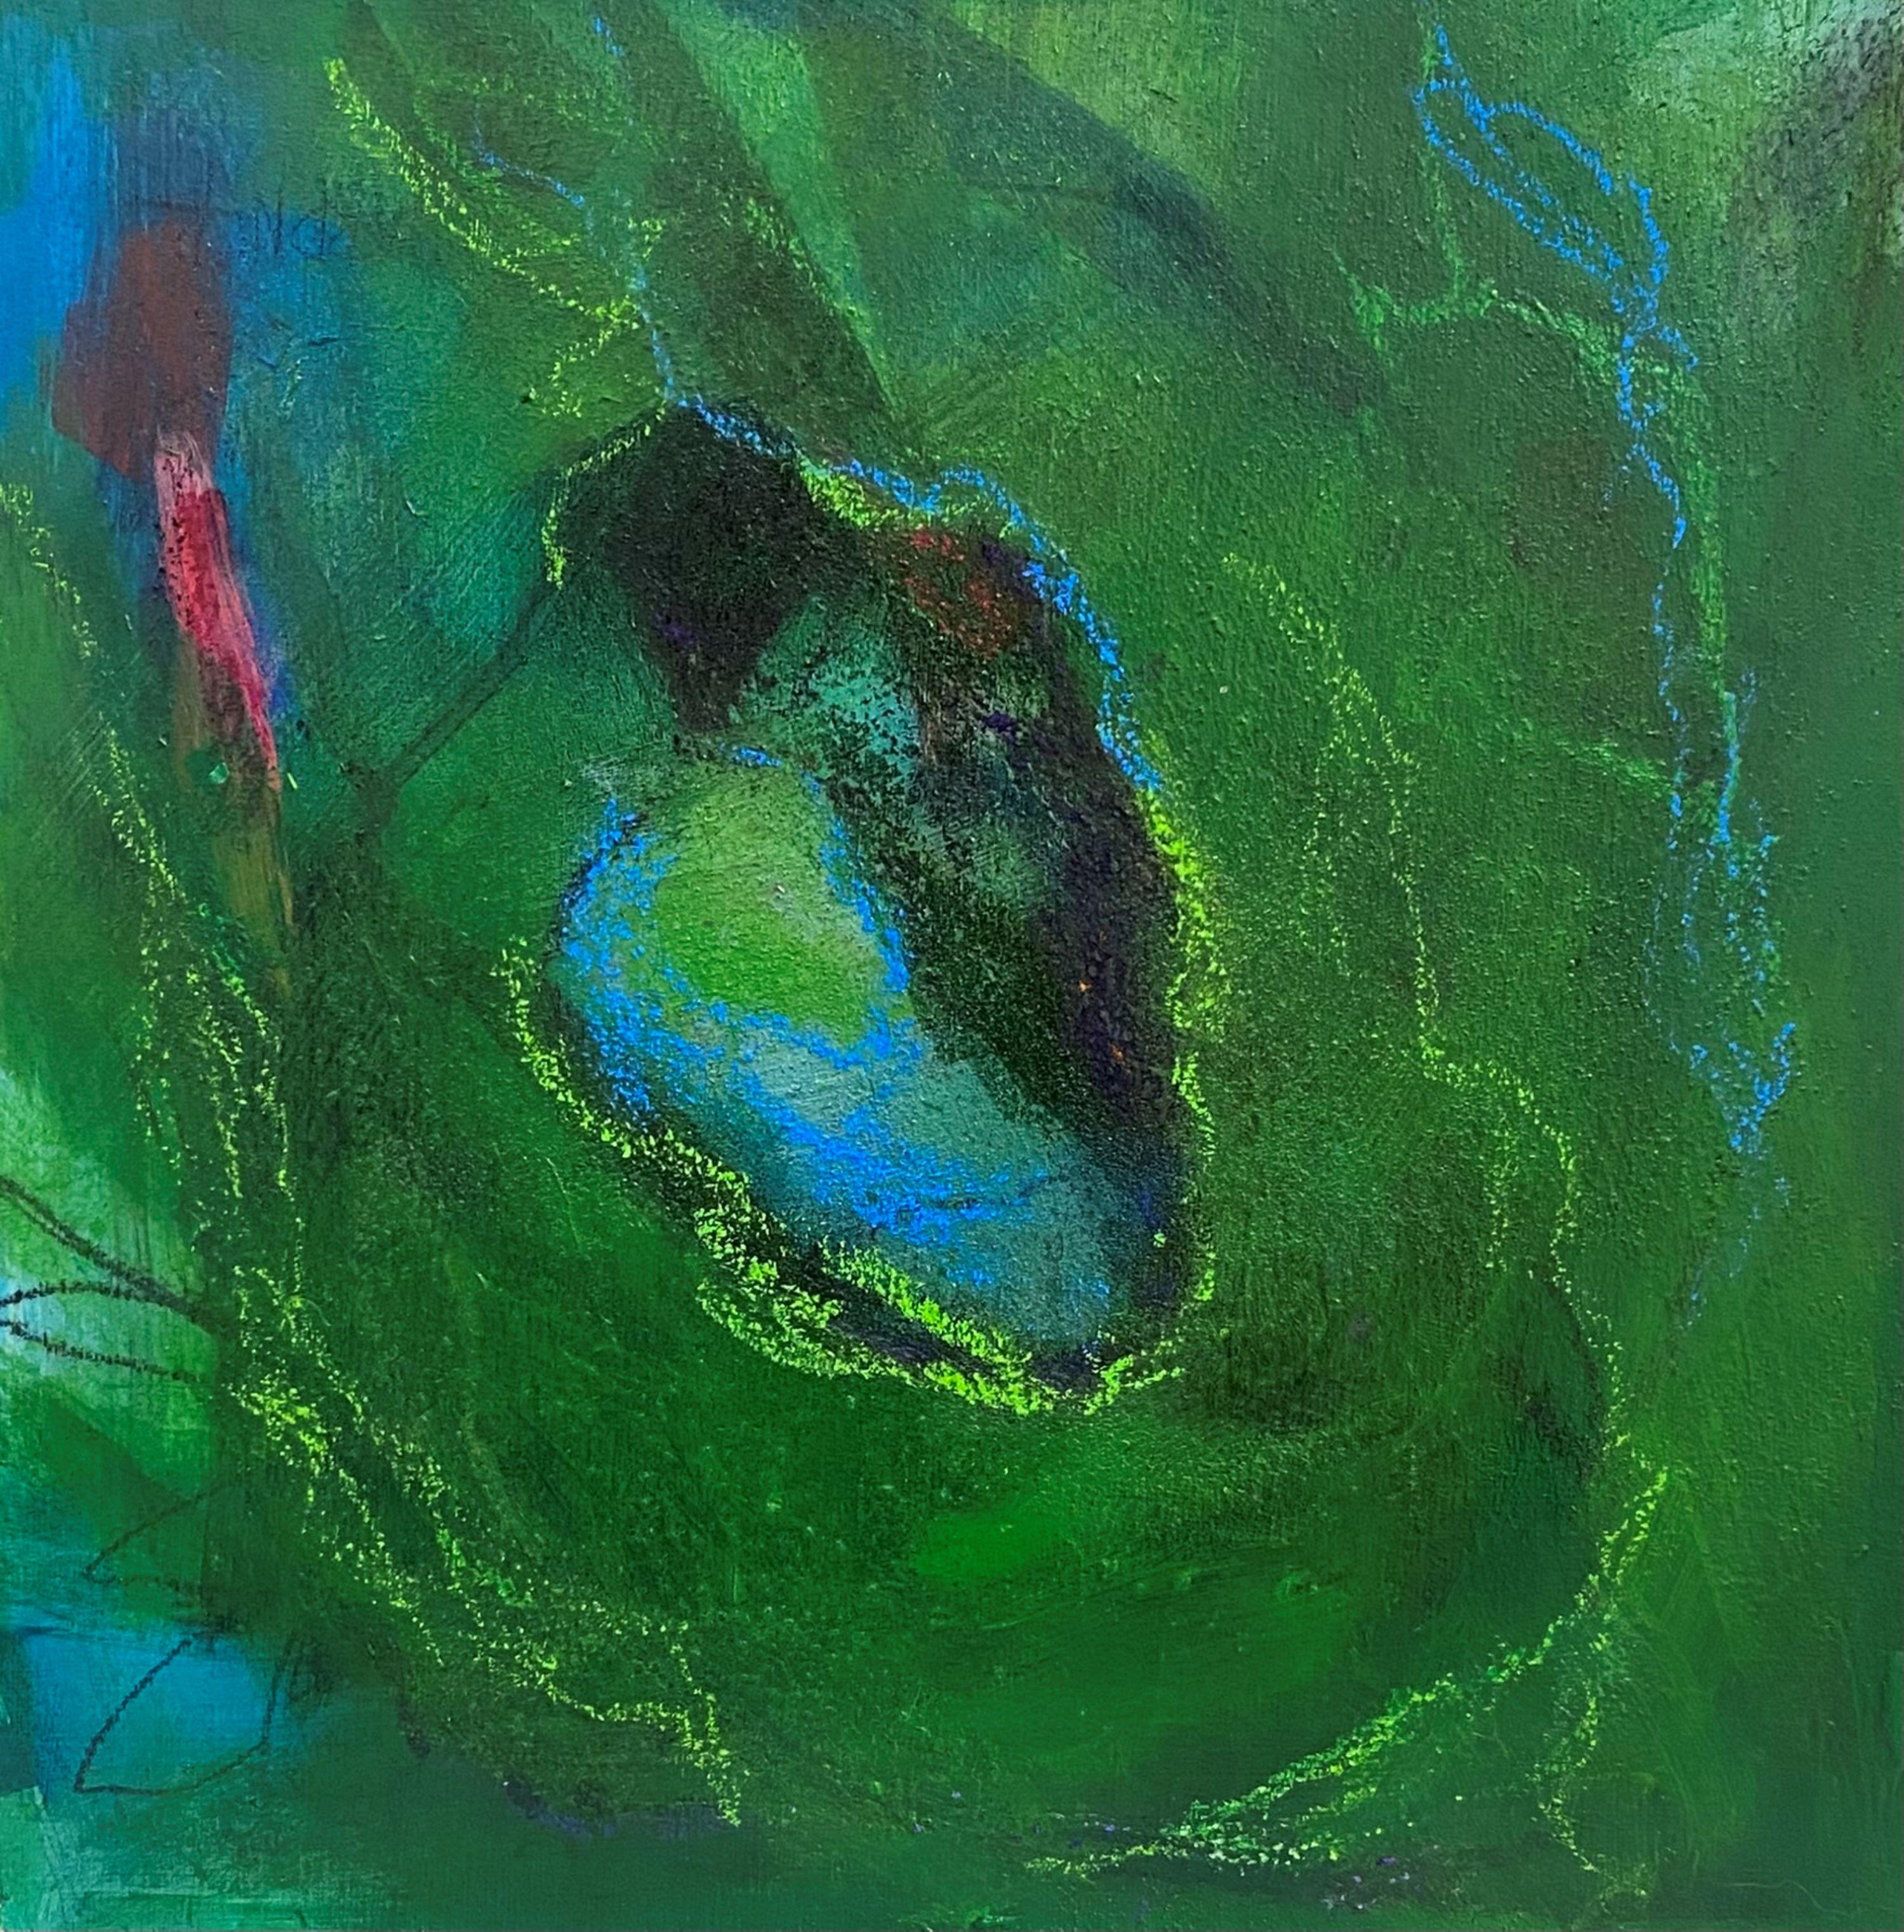 Light and Shadow, Original Contemporary Green Abstract Square Mixed Media Painting
8" x 8" x 2" (HxWxD) Acrylic, Ink, Soft Pastels, Oil Pastels, and Charcoal on Wood Panel

This small format work is one of four square abstract paintings on panel